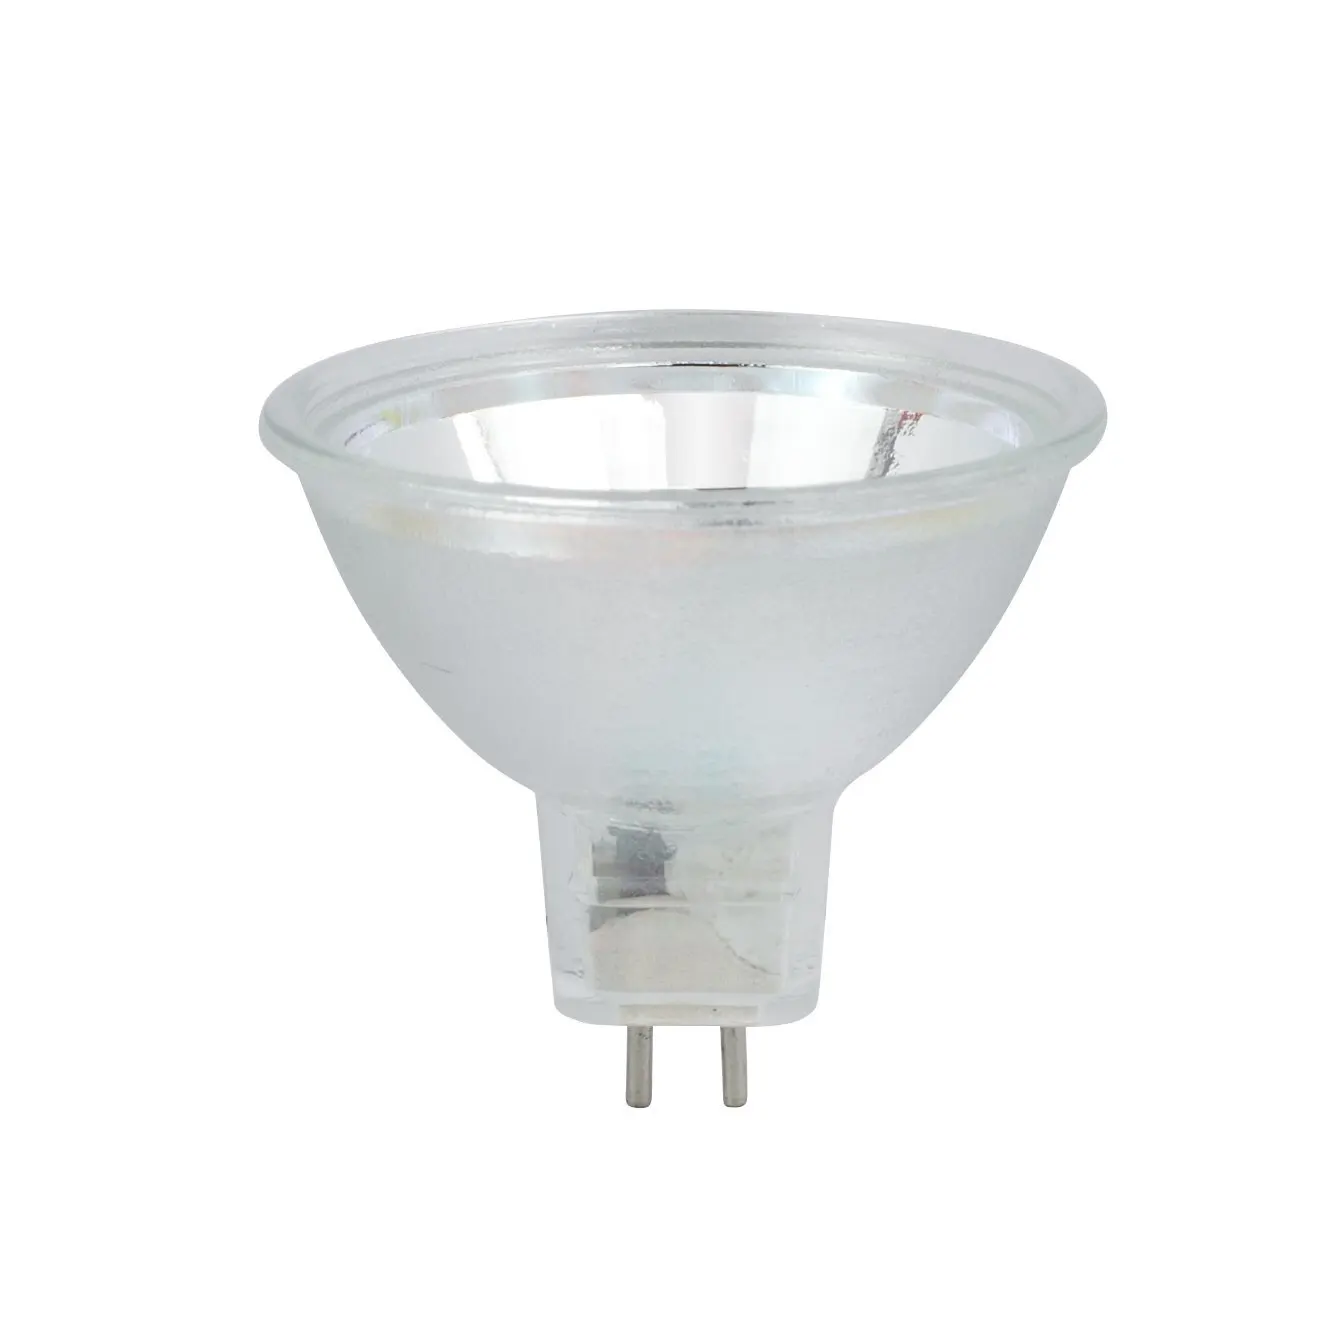 Cheap Osram P Vip 230 0 8, find Osram P Vip 230 0 8 deals on line at